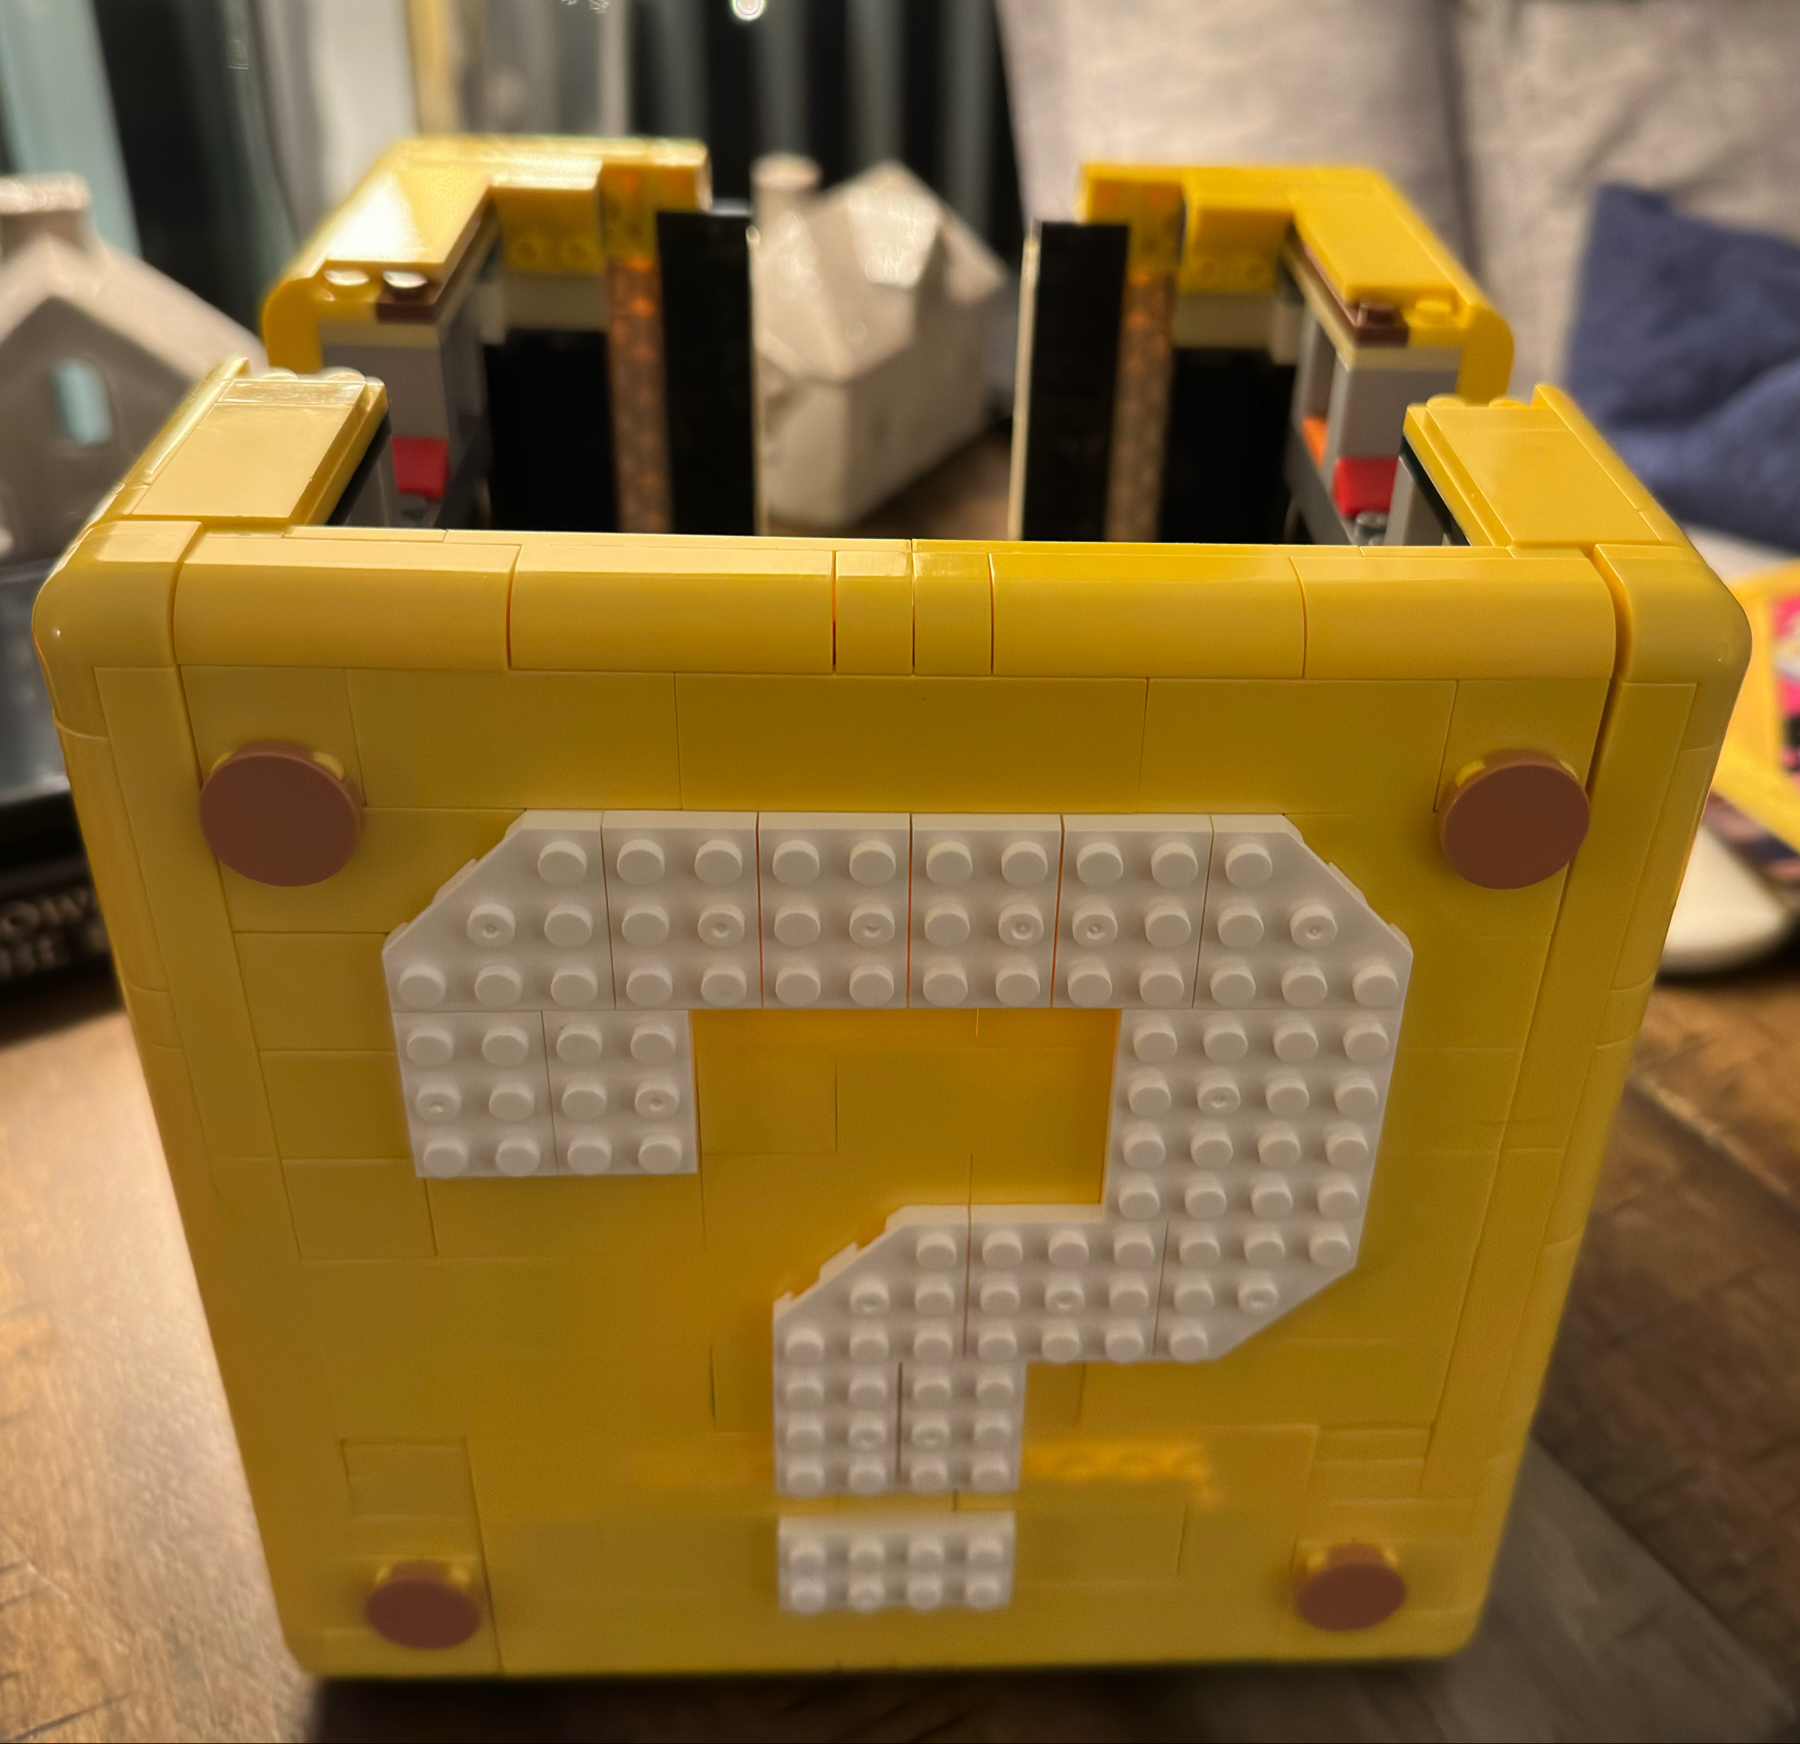 A yellow storage box made of interlocking toy bricks with a 3-dimensional white question mark design on the side.